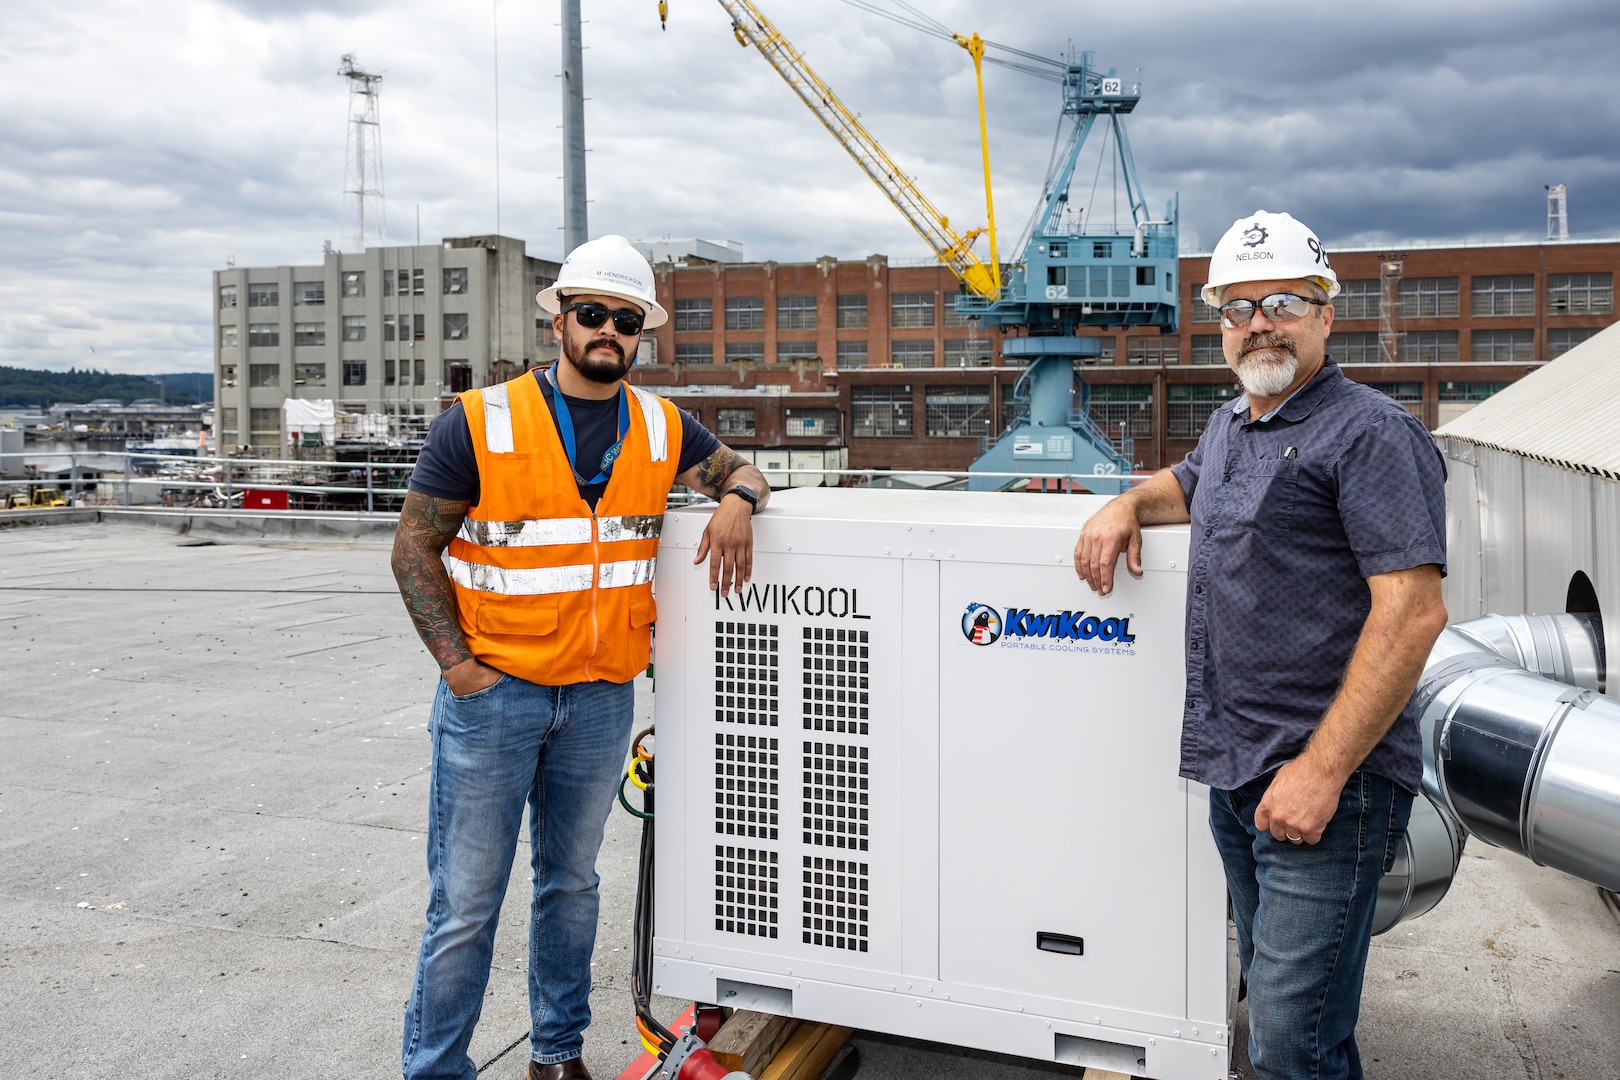 Matt Hendrickson and Brad Nelson pose alongside one of the newly installed temporary cooling systems on the roof of Building 879 at Puget Sound Naval Shipyard & Intermediate Maintenance Facility in Bremerton, Washington. (U.S. Navy photo by Jeb Fach)